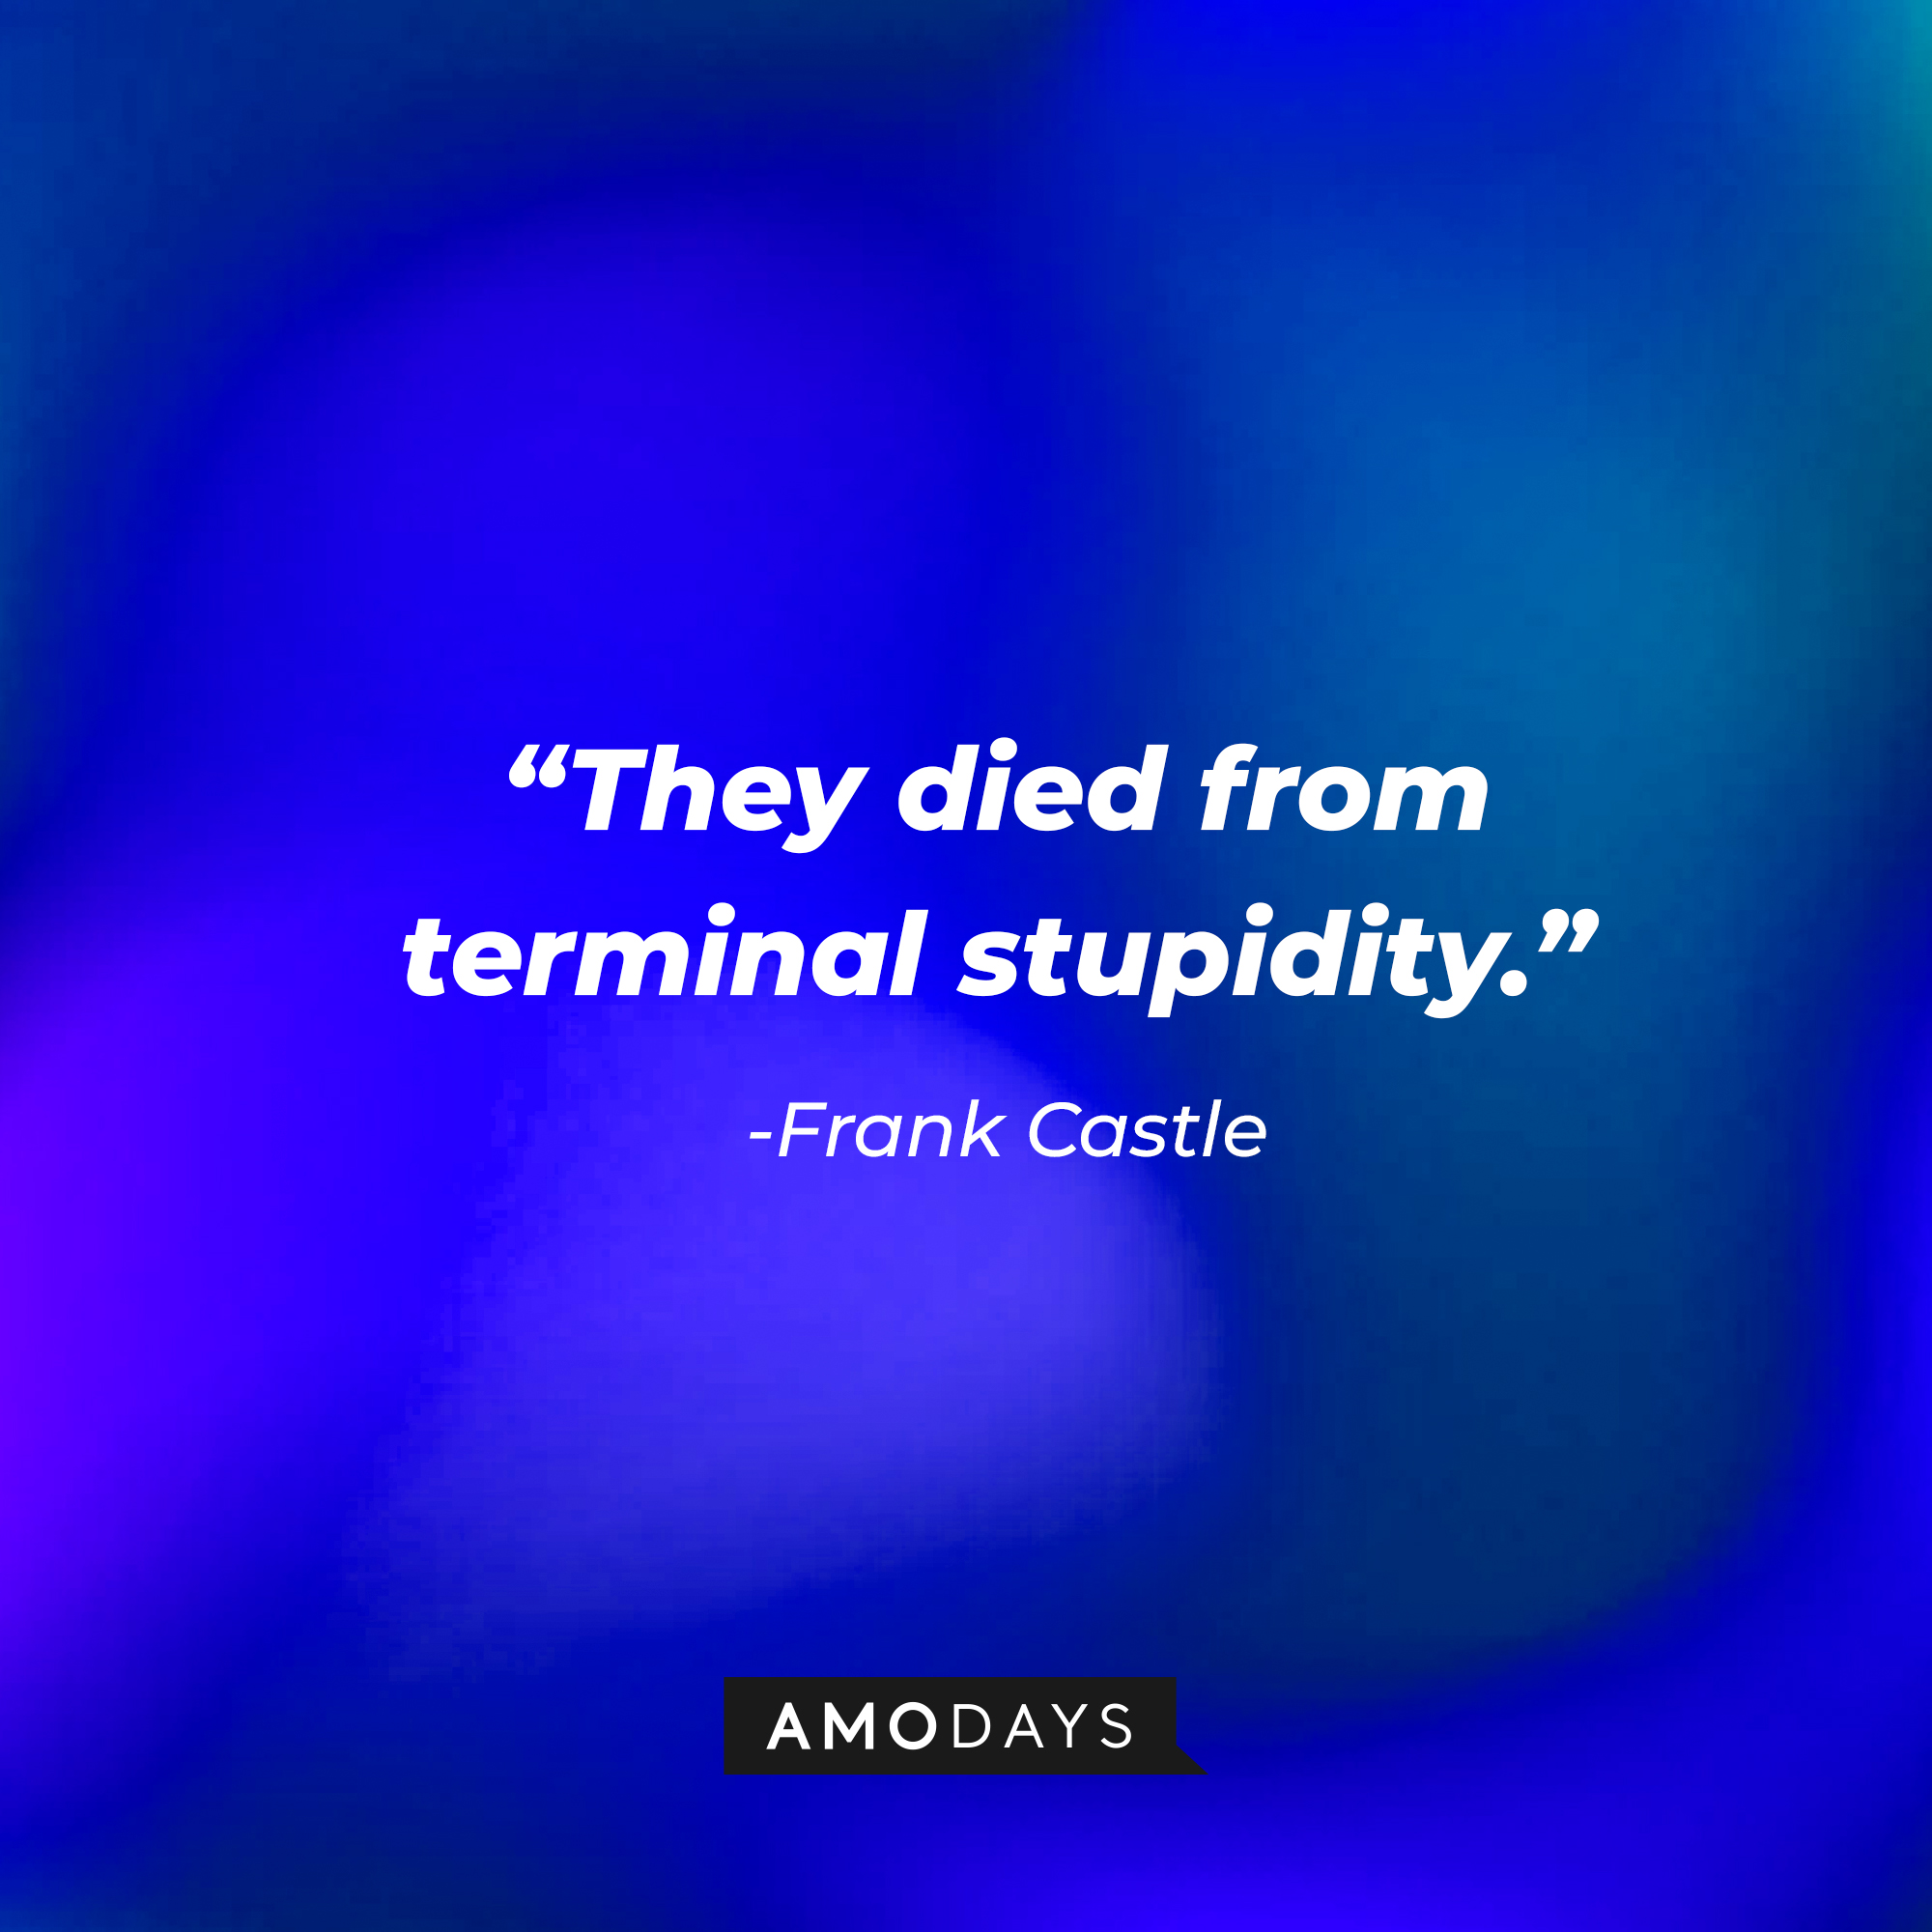 Frank Castle’s quote: “They died from terminal stupidity.” | Source: AmoDays